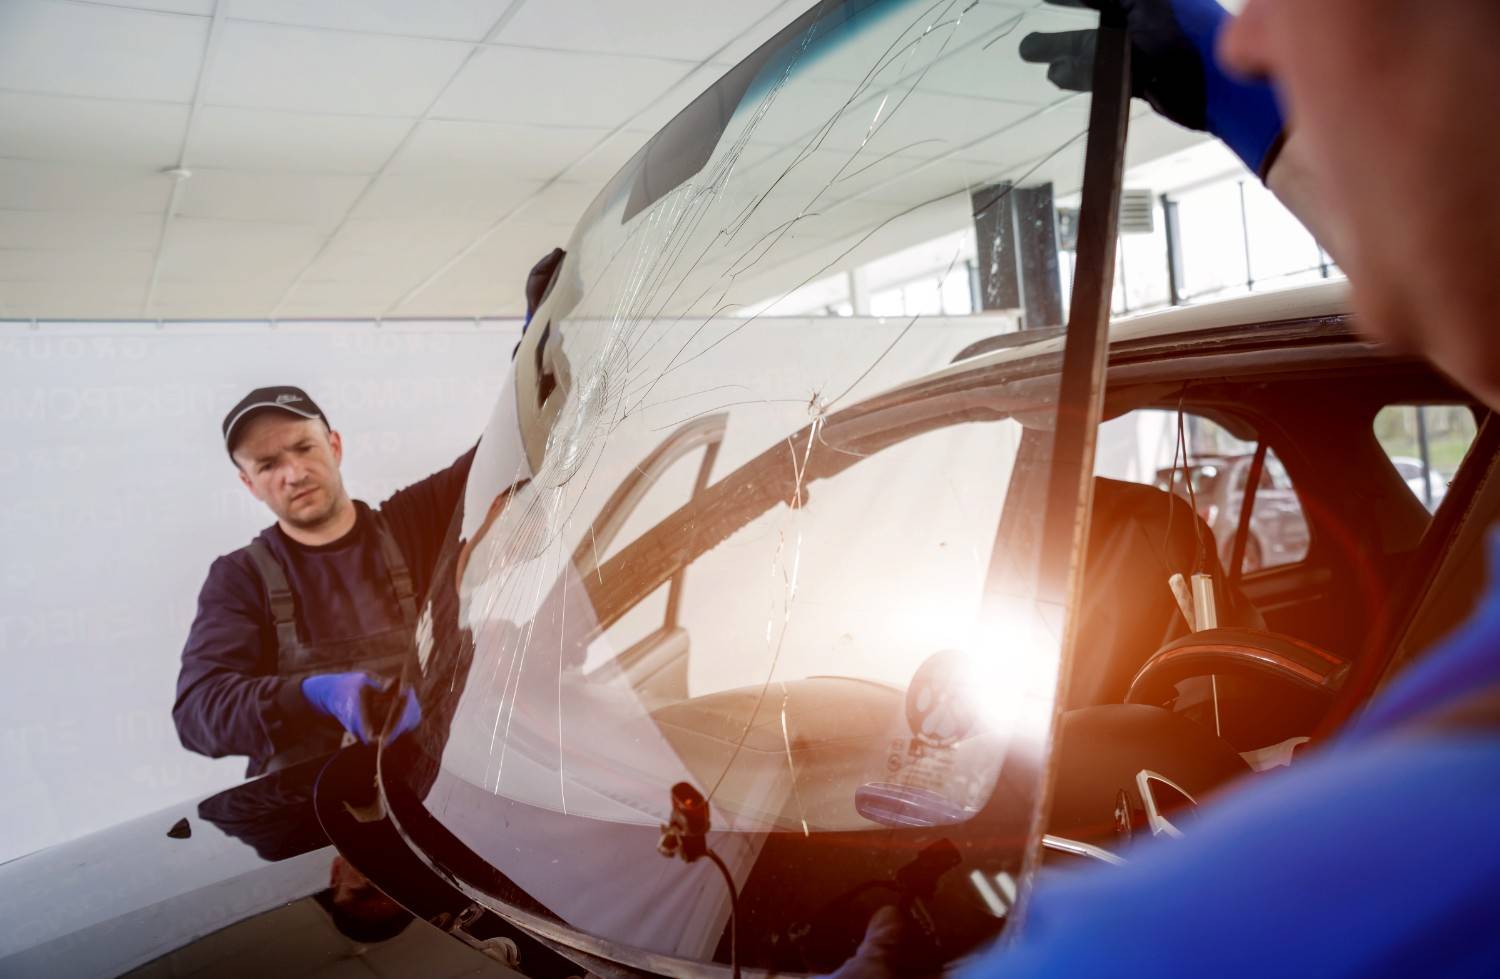 Get Efficient Auto Glass Repair And Windshield Replacement in Glendale, AZ